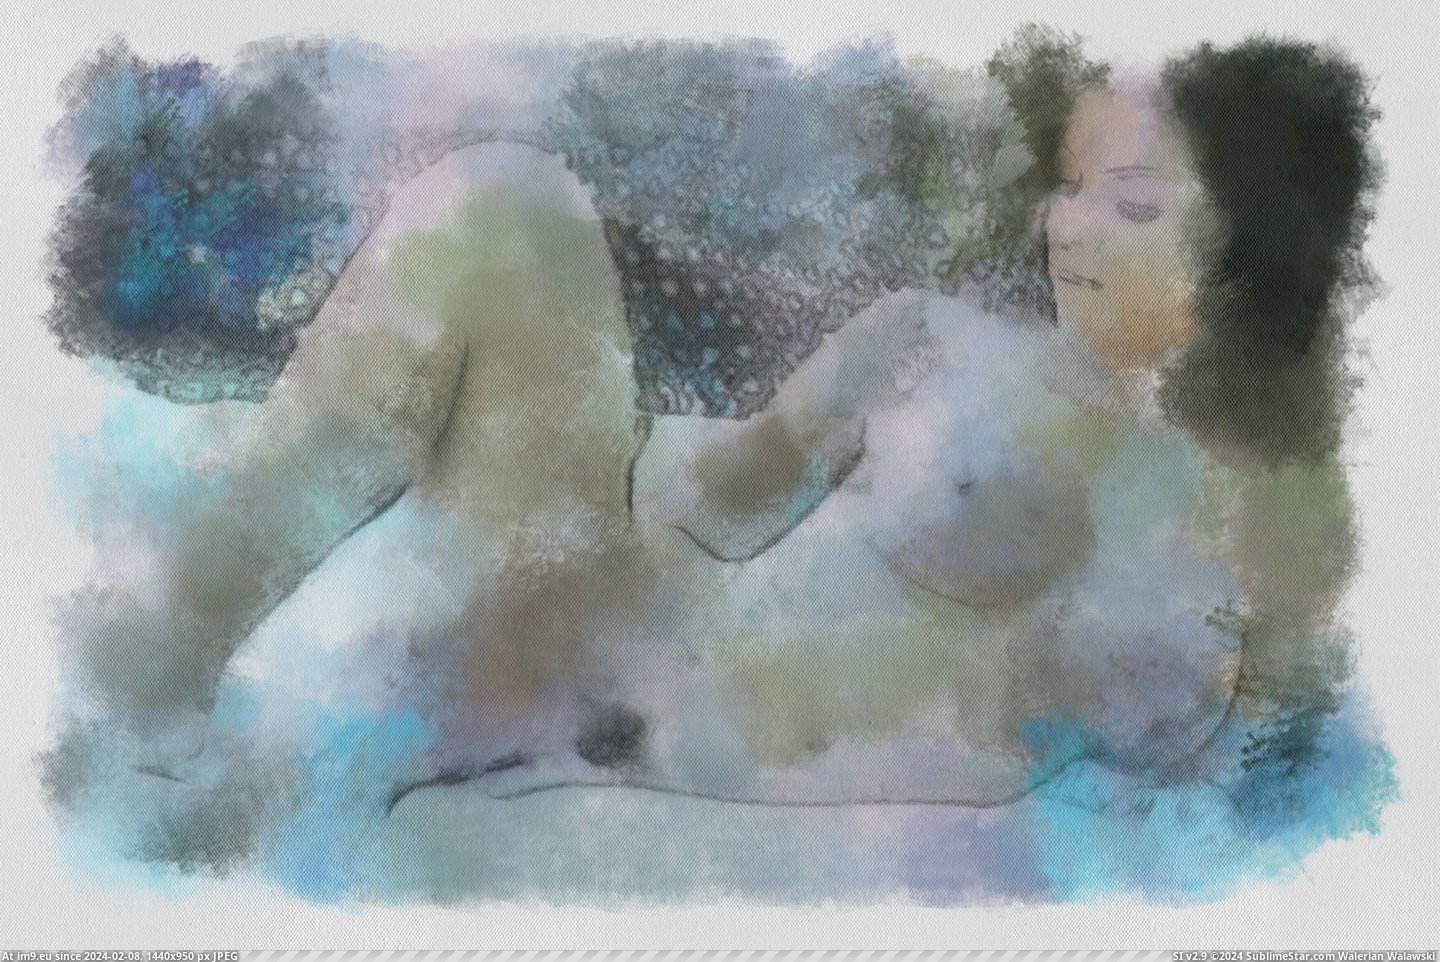  #2400x1596  !107_Aquarell Pic. (Image of album Adult fineart nude))